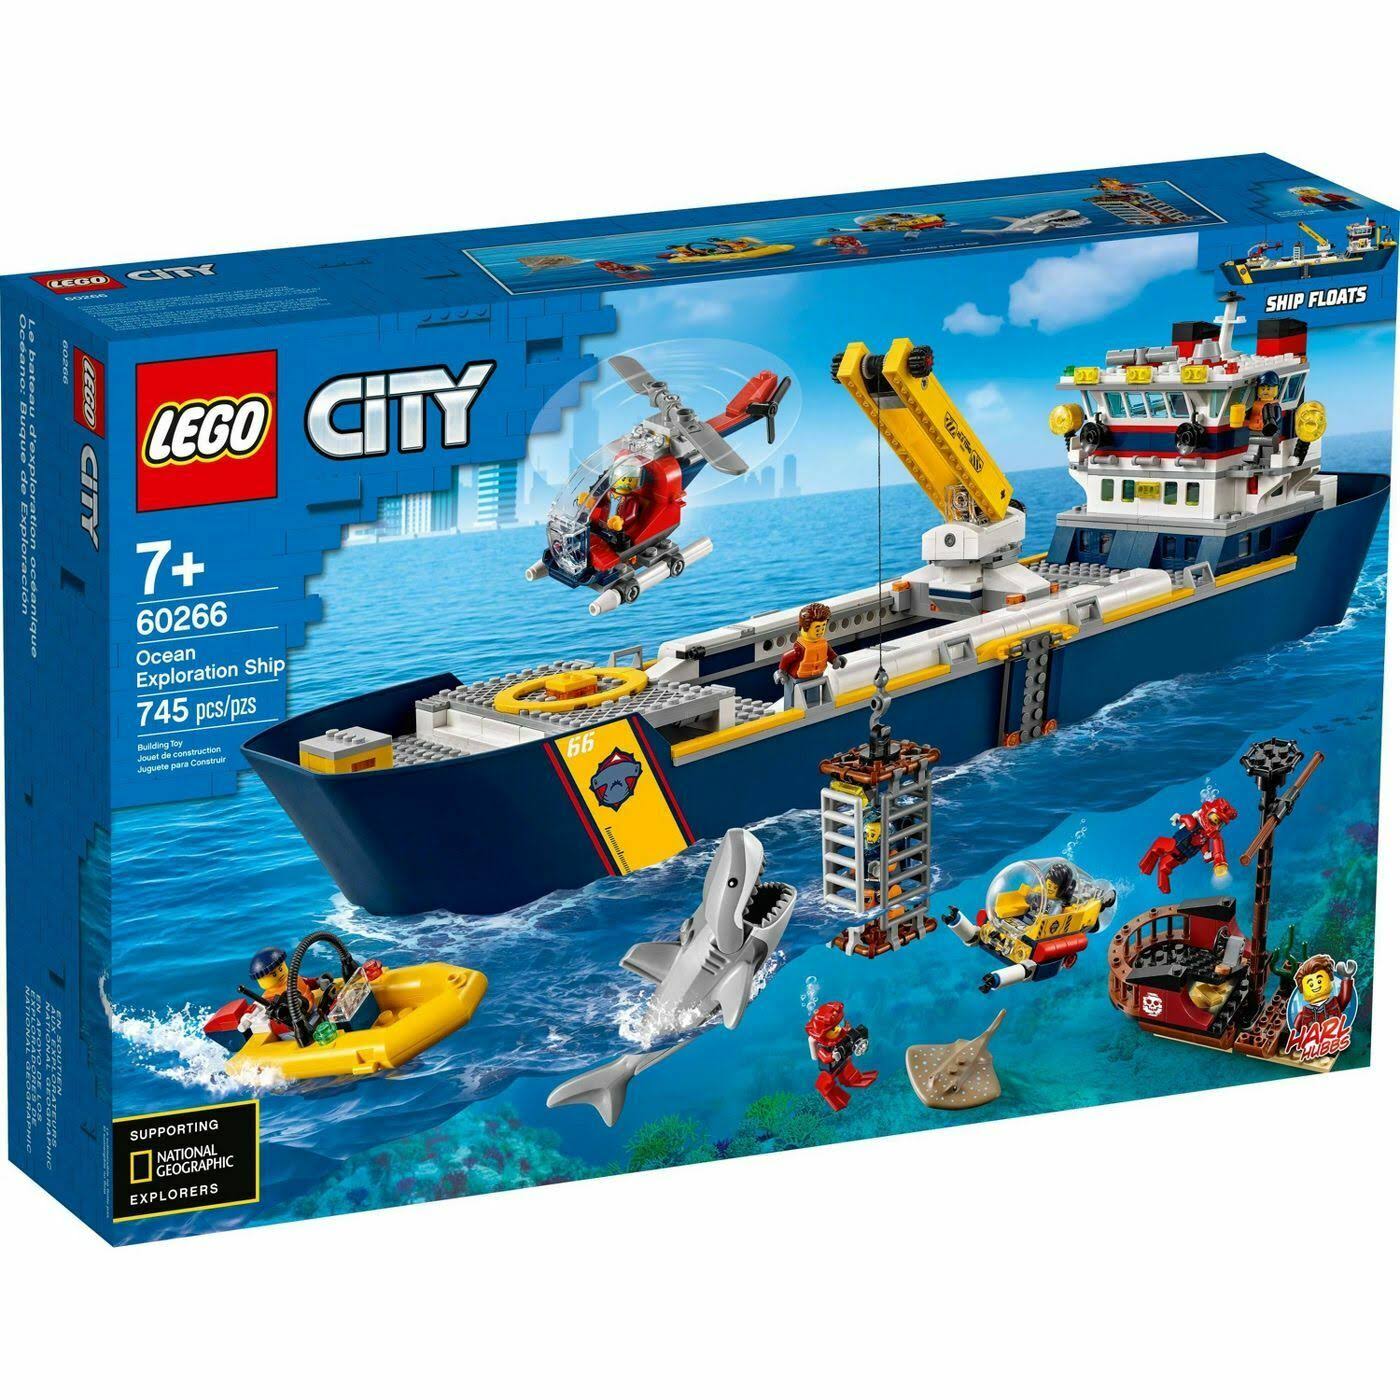 Lego 60266 City Ocean Exploration Ship Building Kit New with Sealed Box